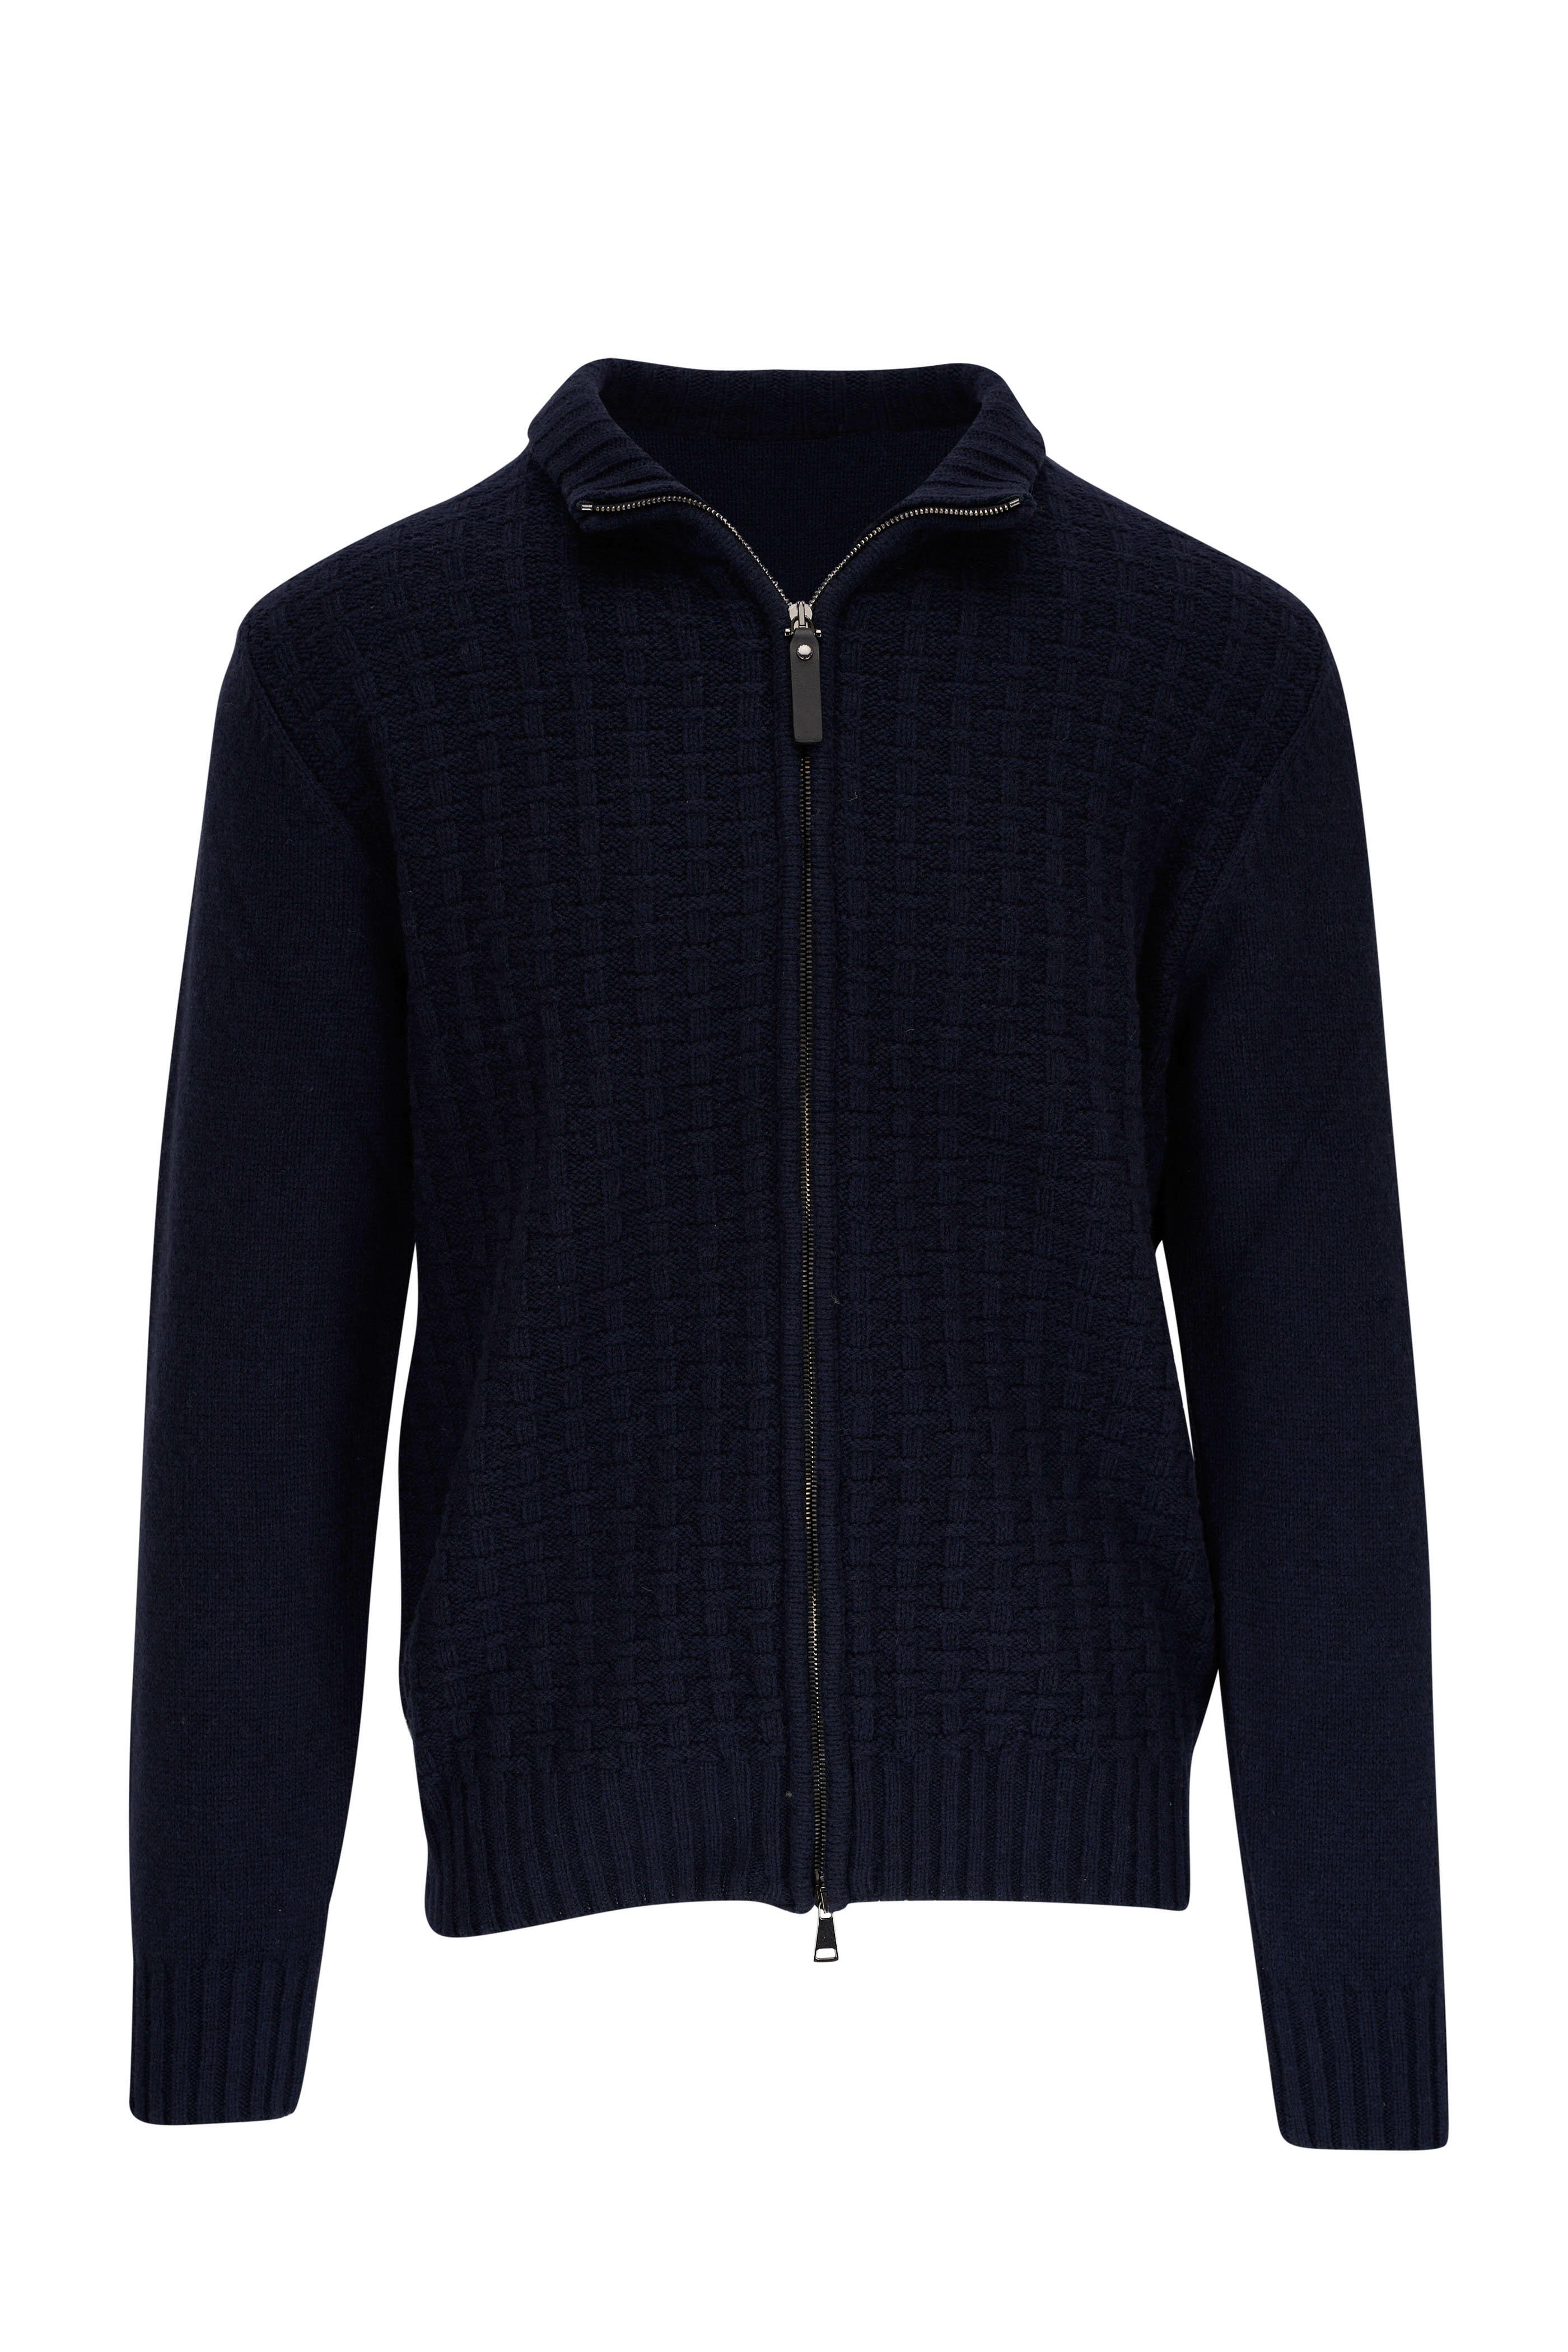 Canali - Navy Blue Knit Full Zip Sweater | Mitchell Stores